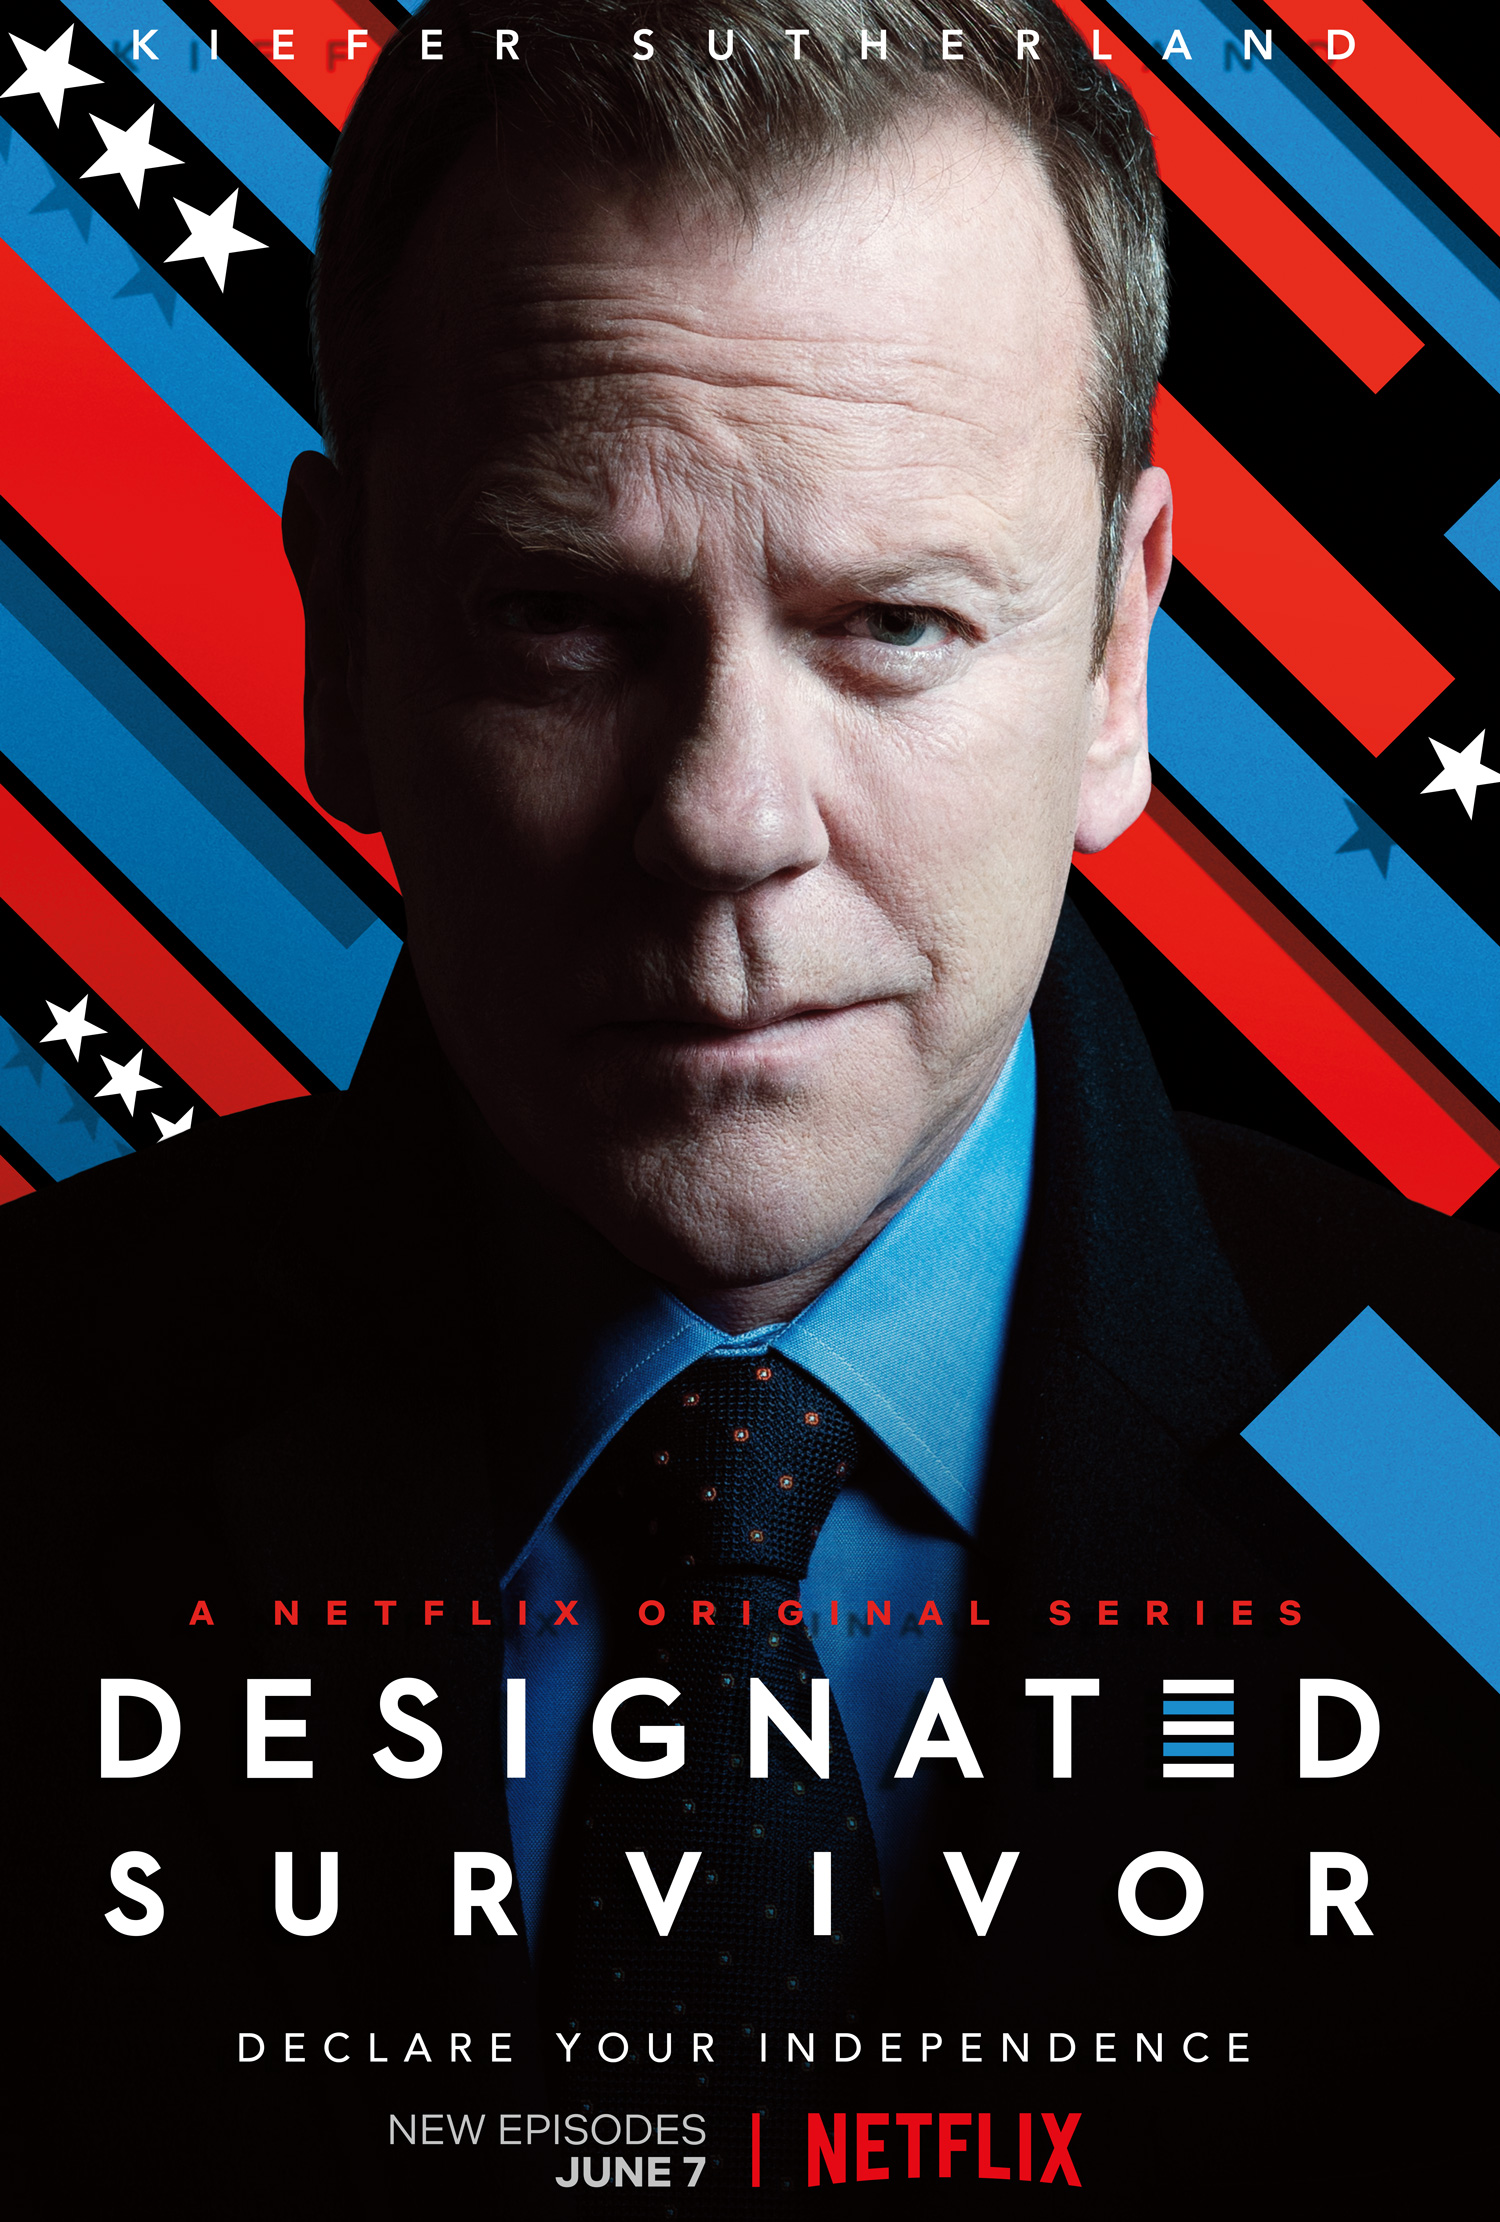 Designated Survivor Season Three Trailer and Poster Released by